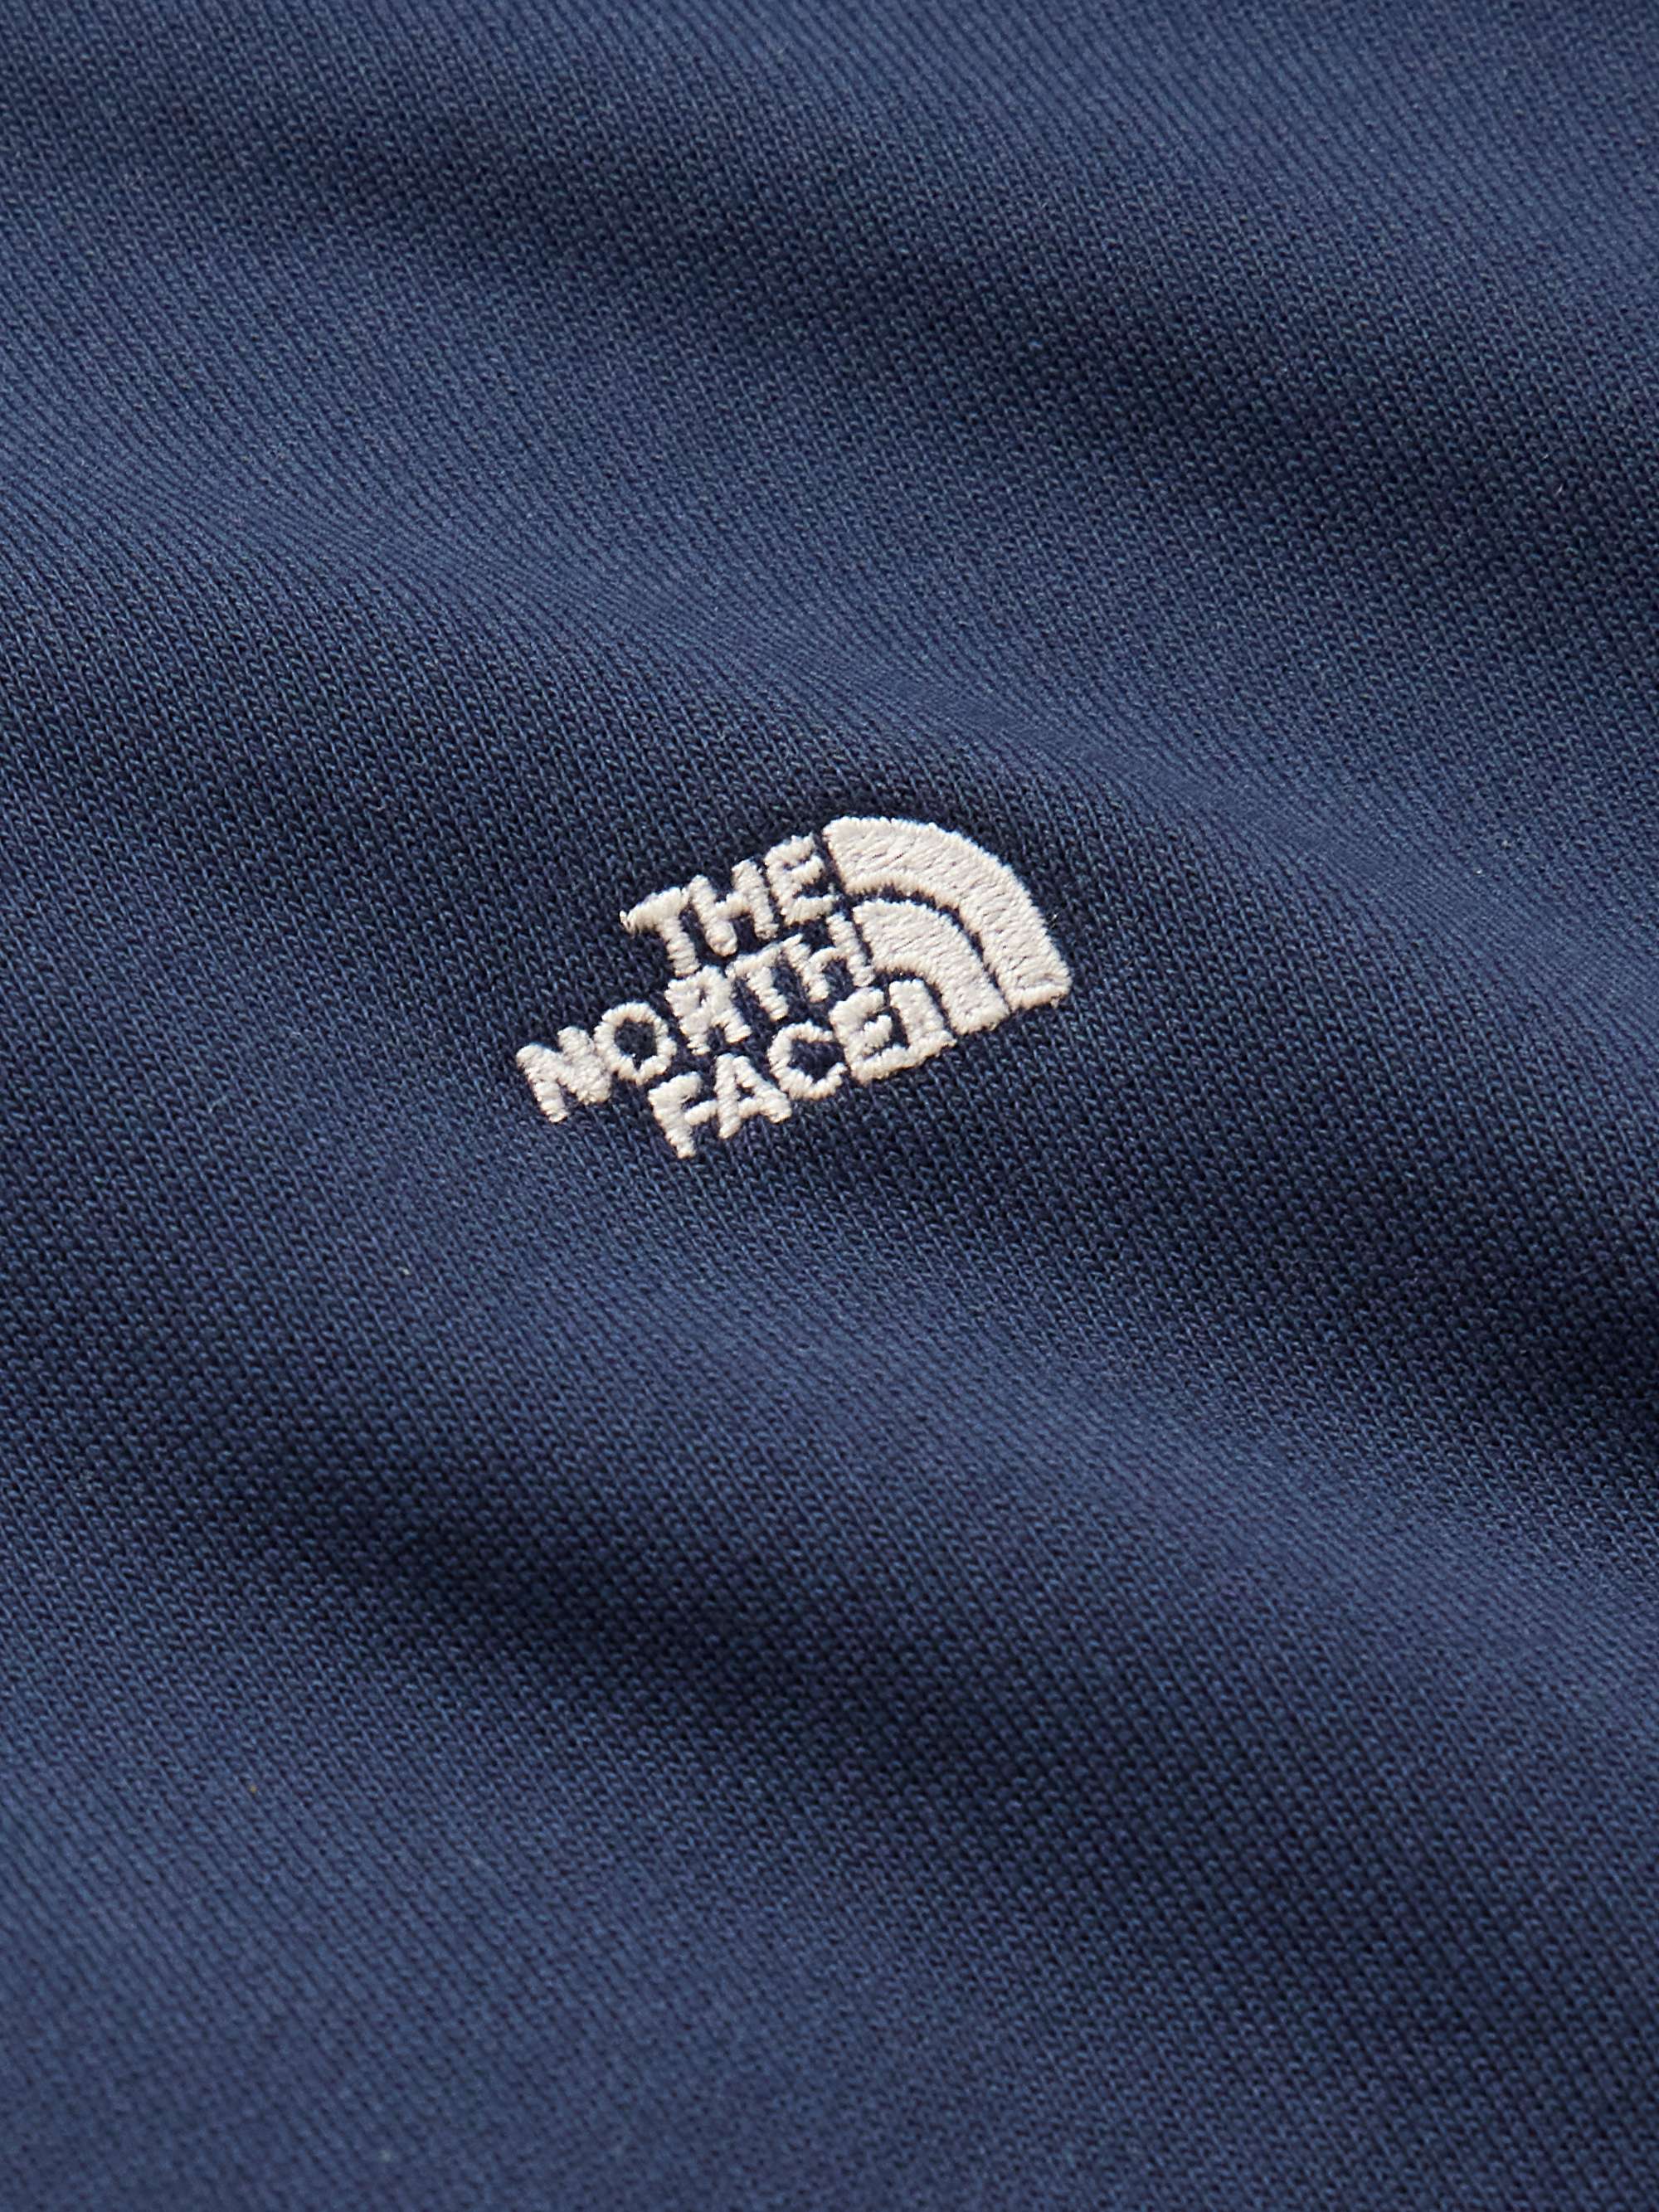 THE NORTH FACE Logo-Print Cotton-Jersey Hoodie